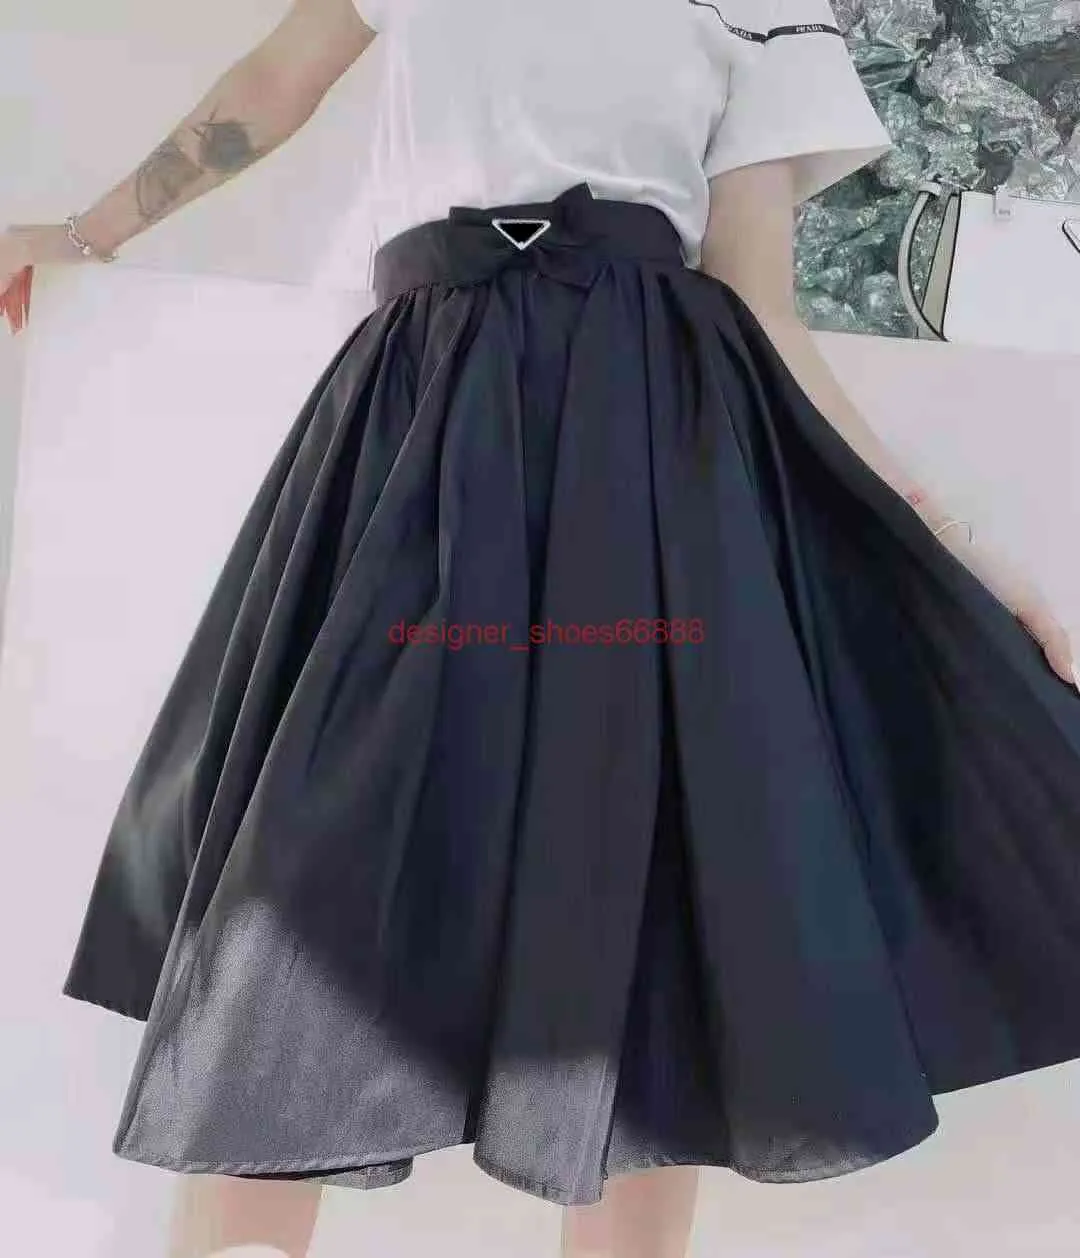 21ss Women Skirt Fashion Style Bow Budges High Quality Lady Half Dresses with Inverted Triangle Matches Skirts for Spring Autumn Outwears